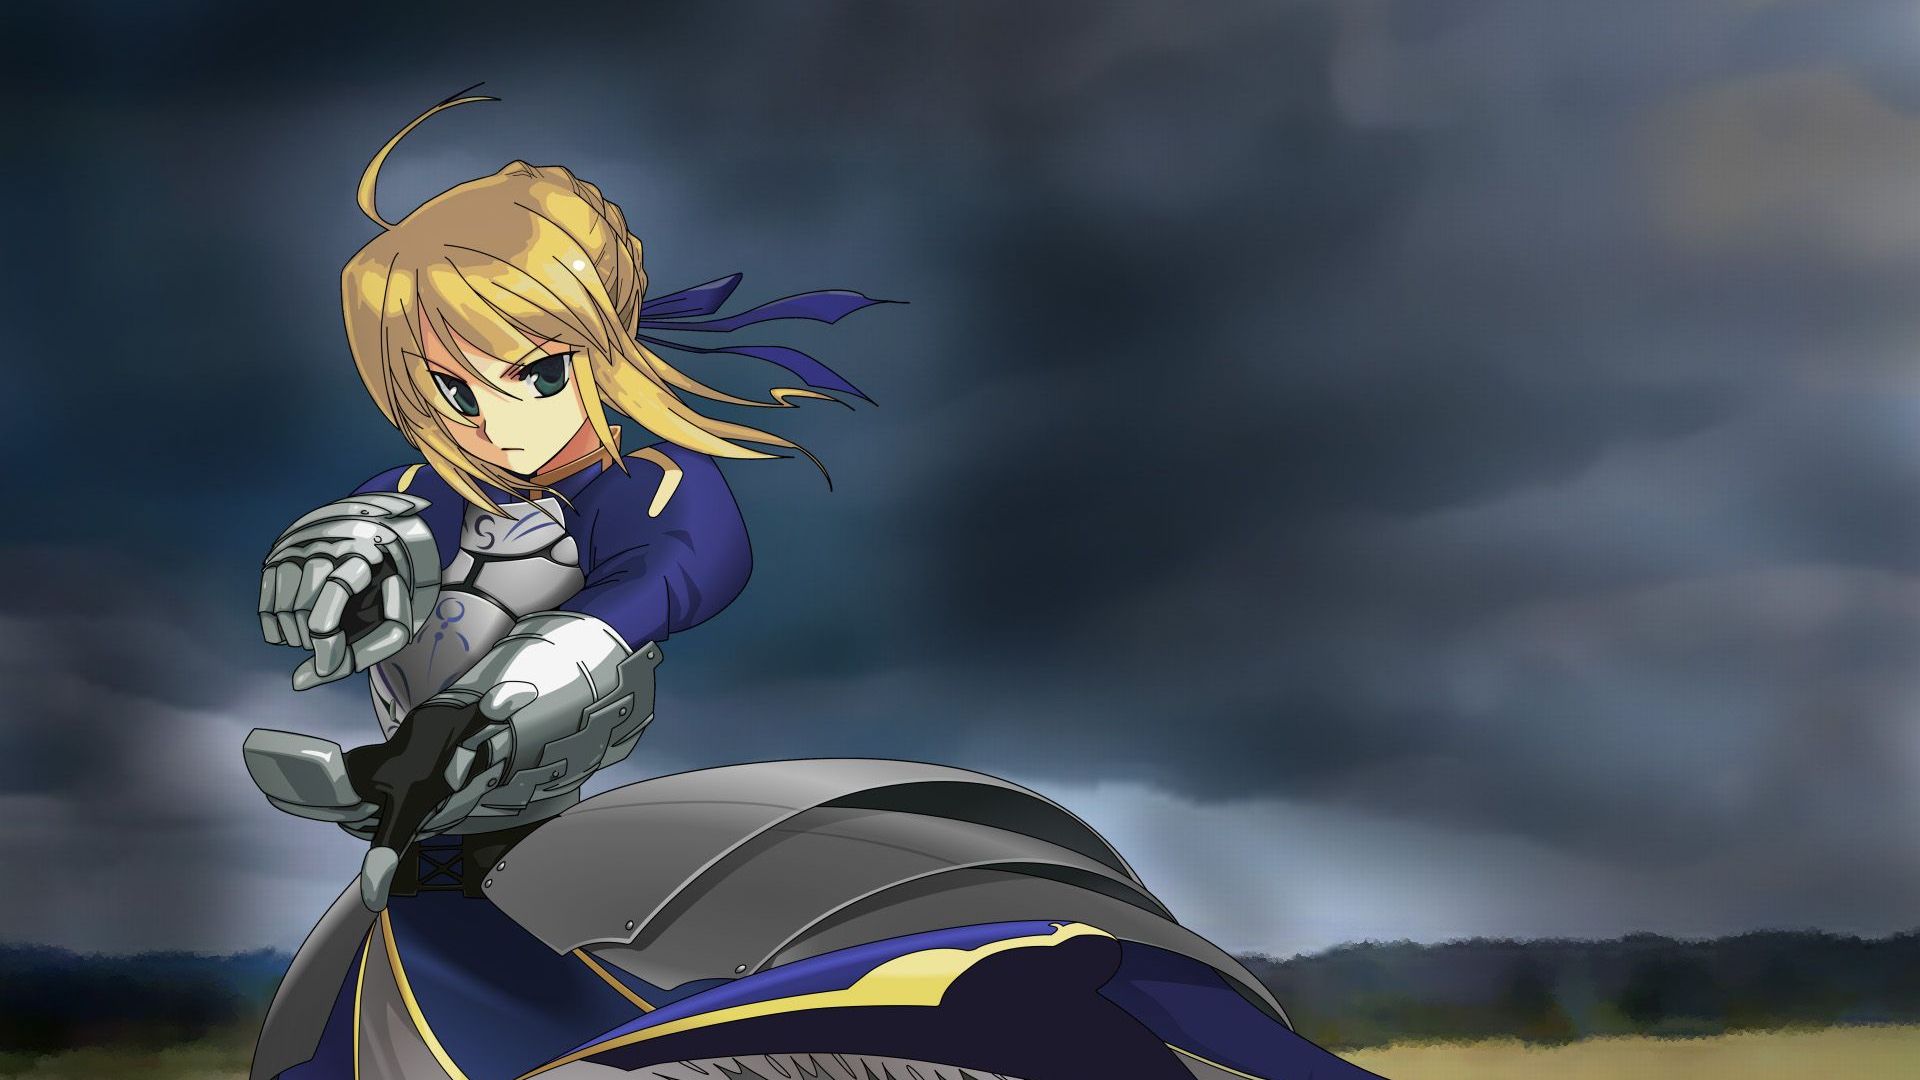 Fate Stay Night Saber Widescreen Wallpaper